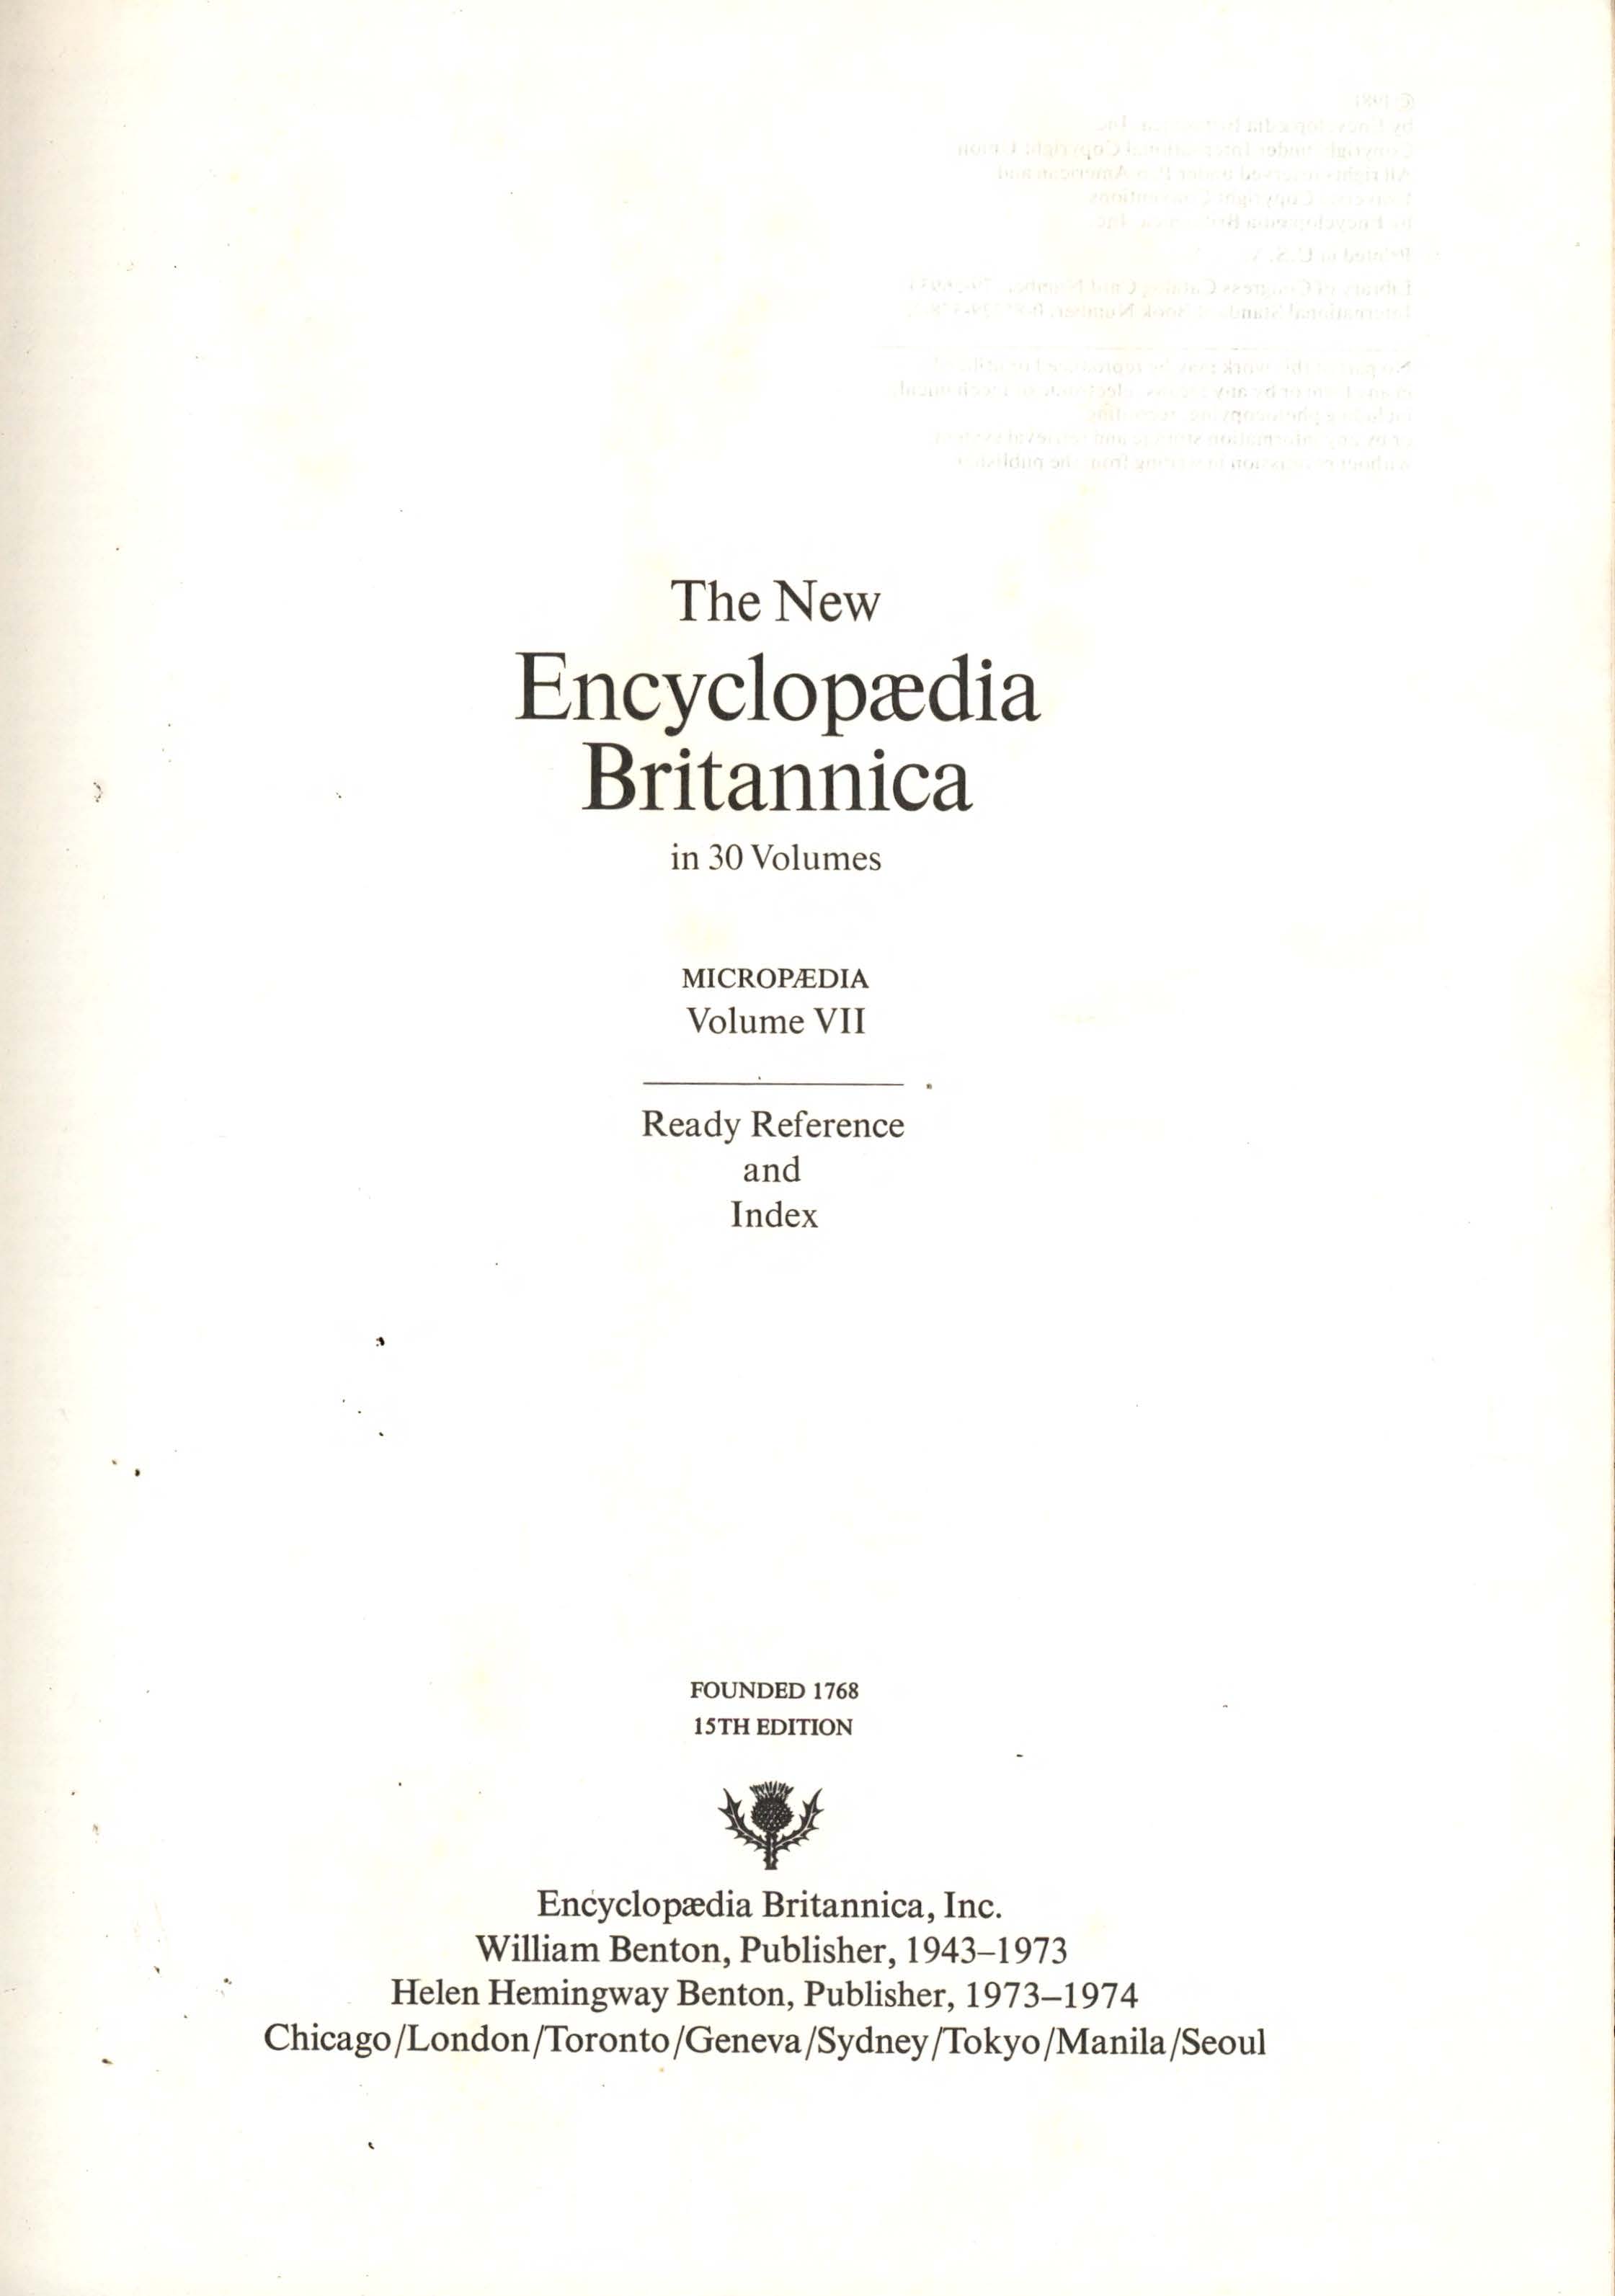 The new encyclopedia britannica : micropedia ready reference and index vol. VII